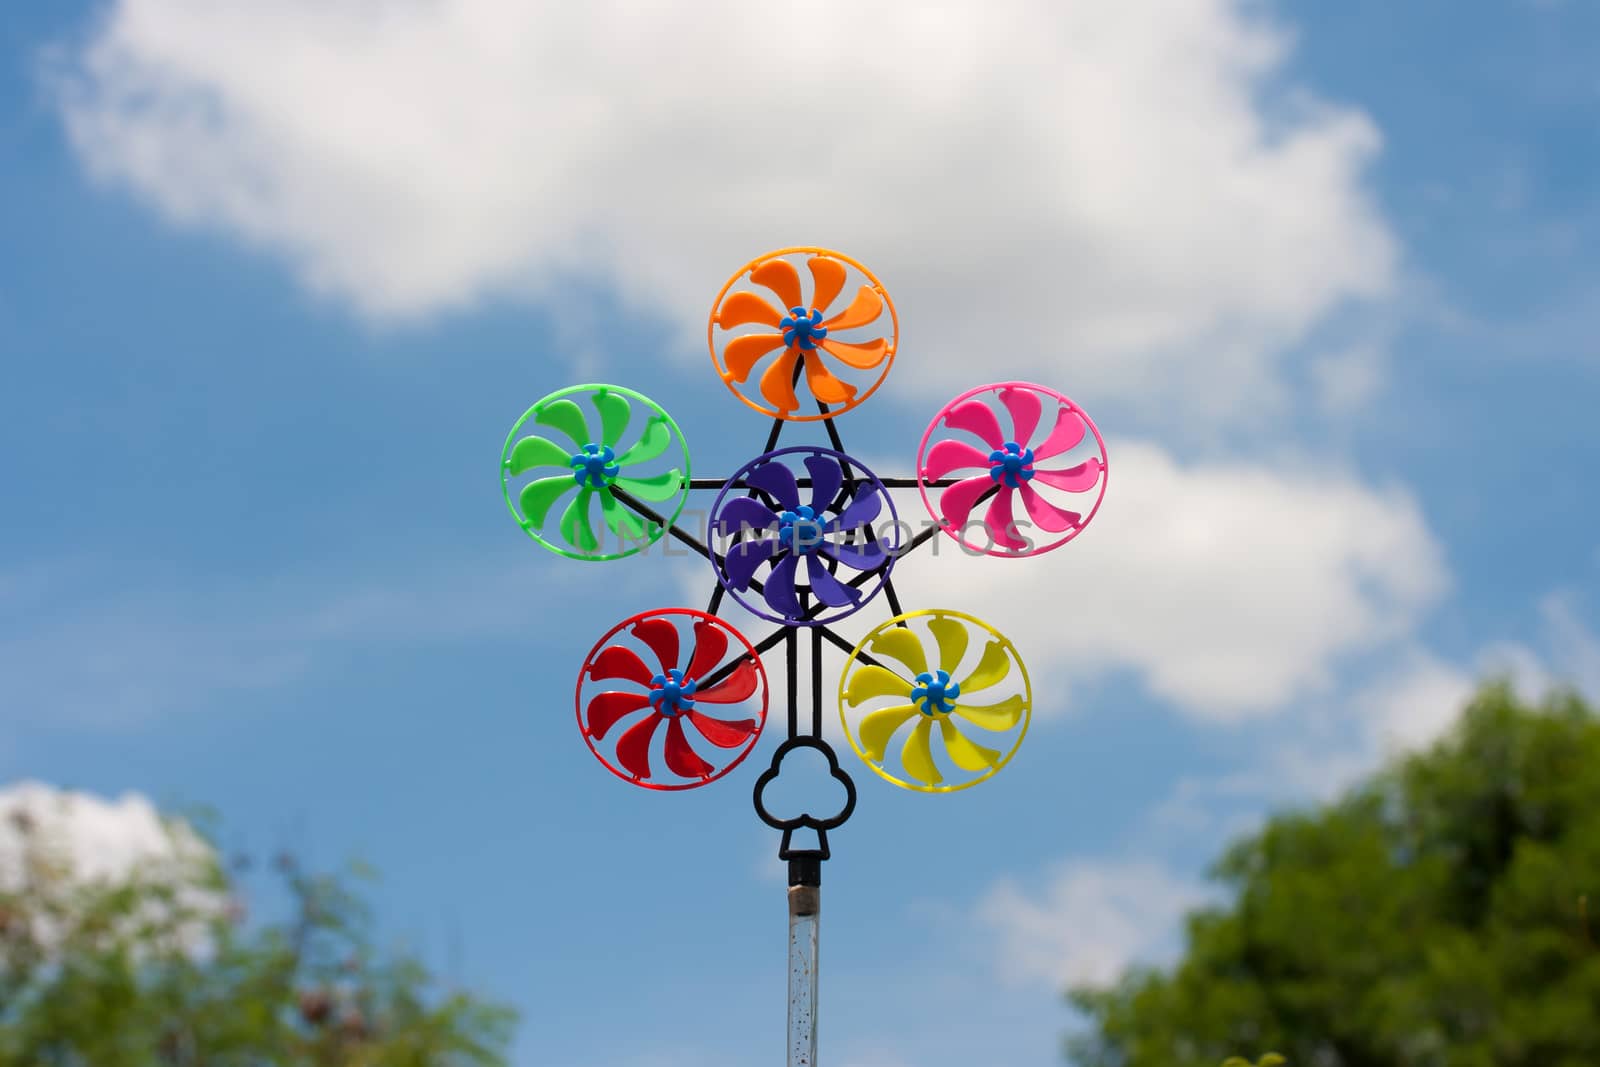 Colorful pinwheel against blue sky with clouds